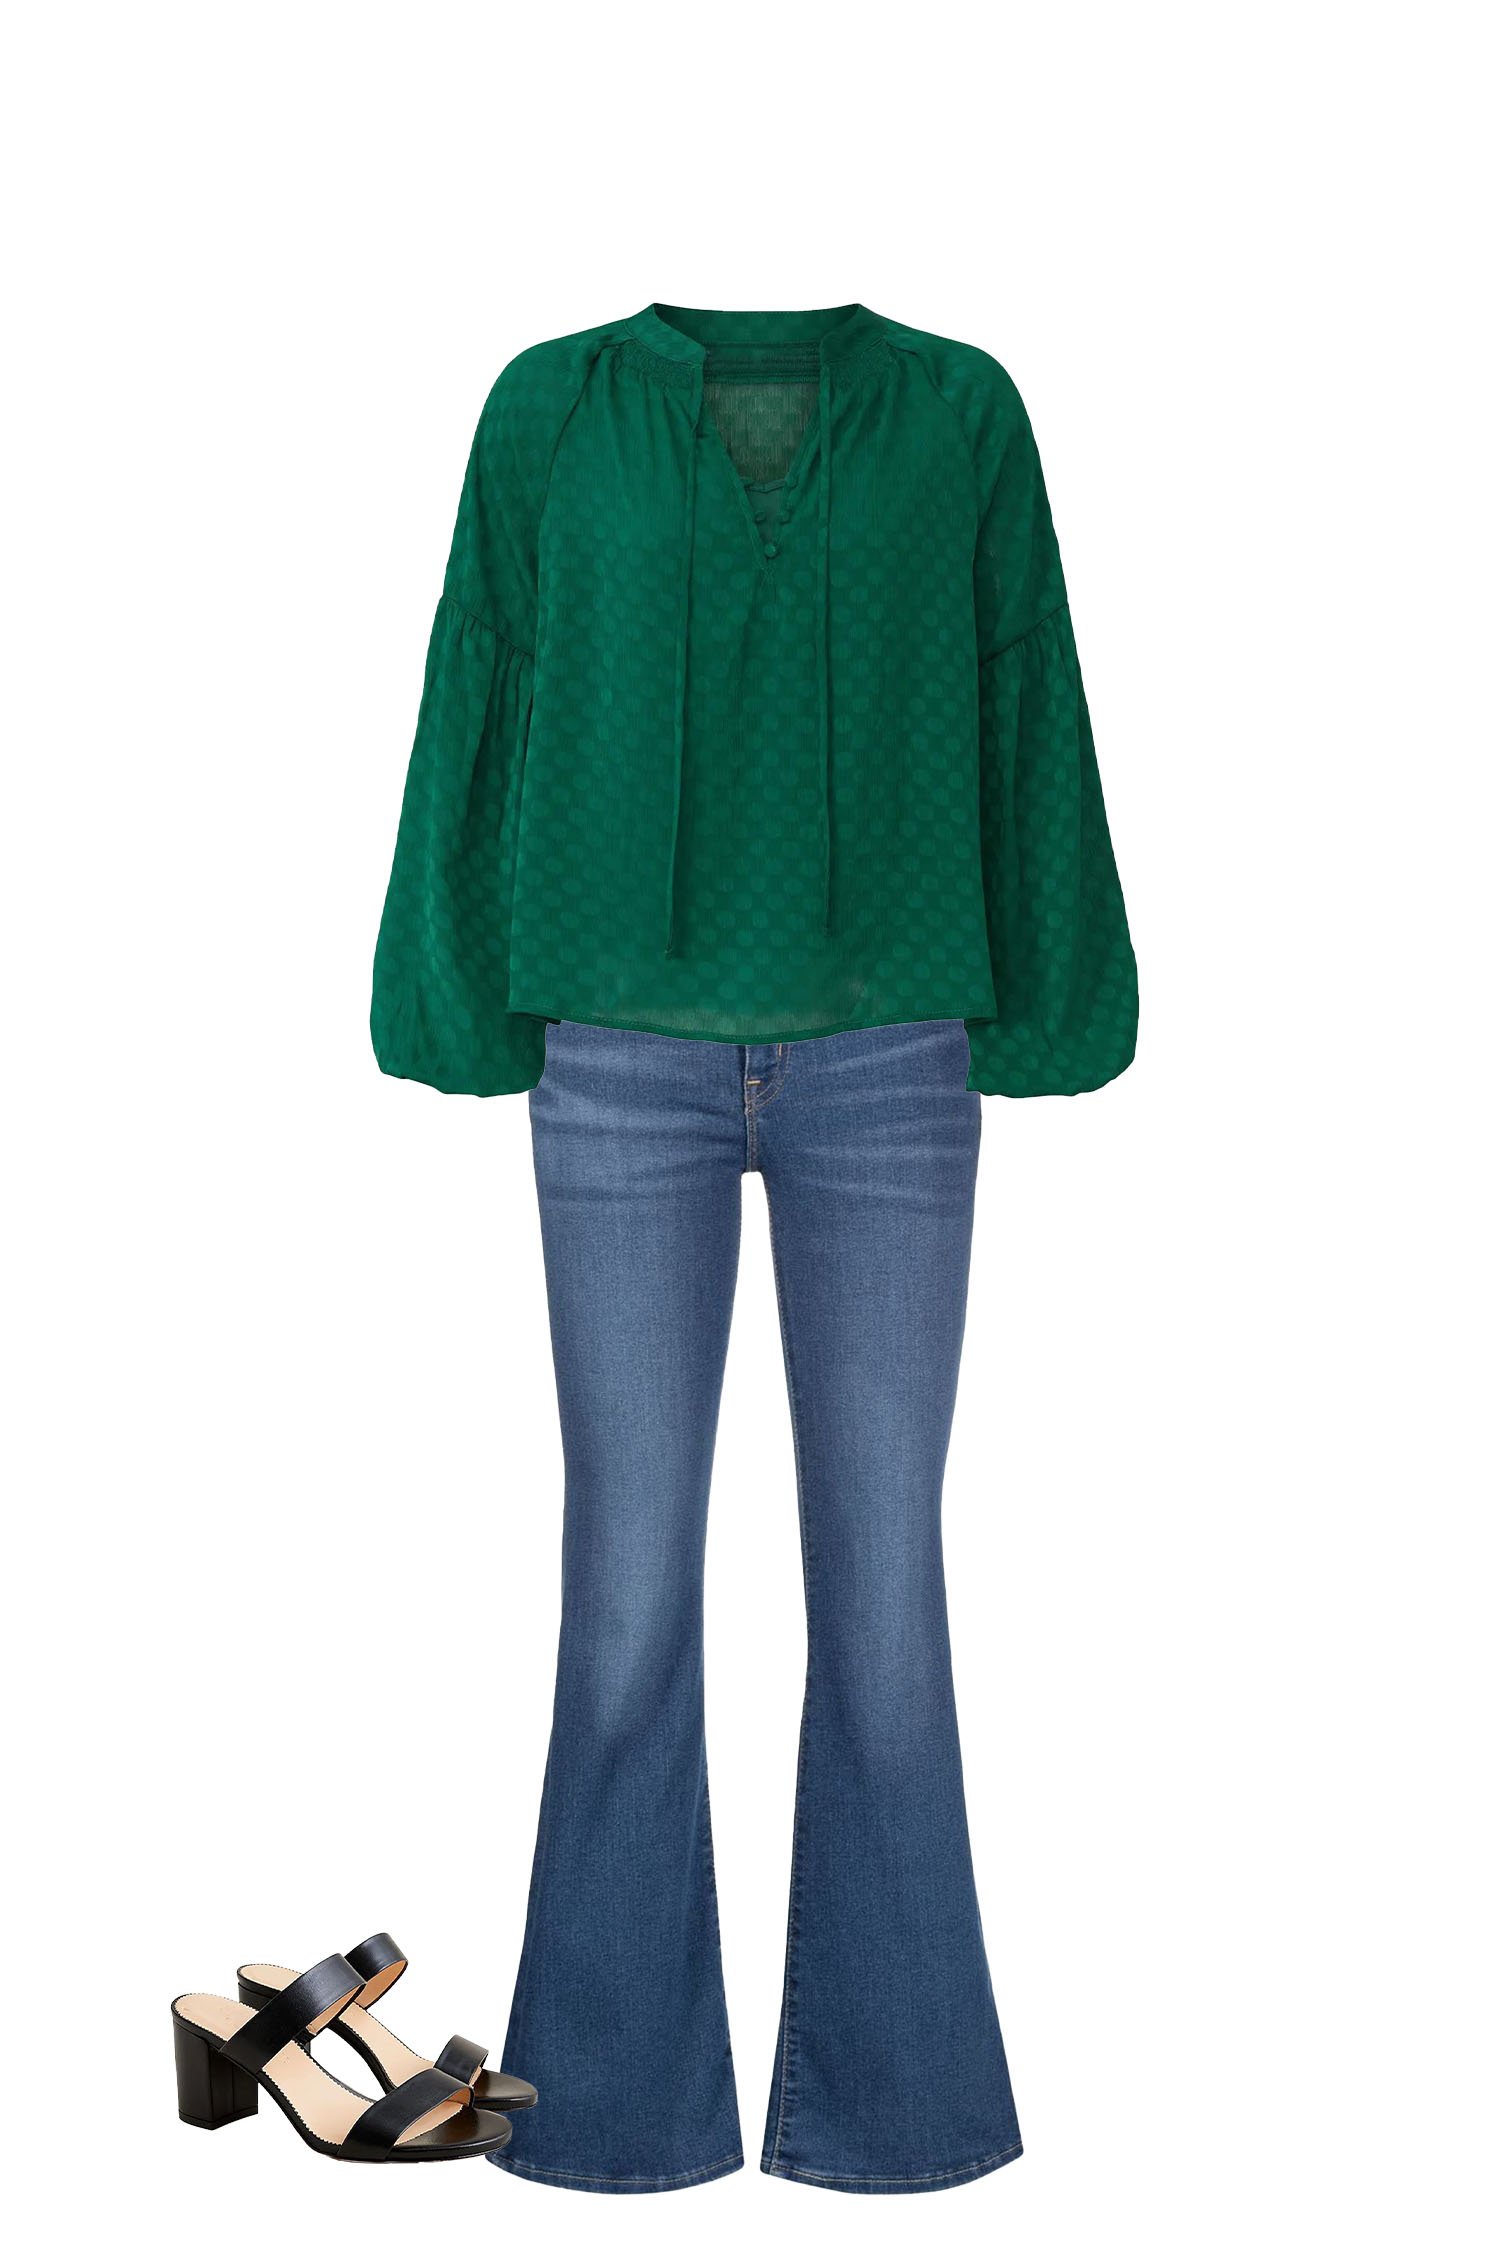 Pair Classic Blue Flare Jeans with Green Balloon Sleeve Blouse, and Block Heel Sandals